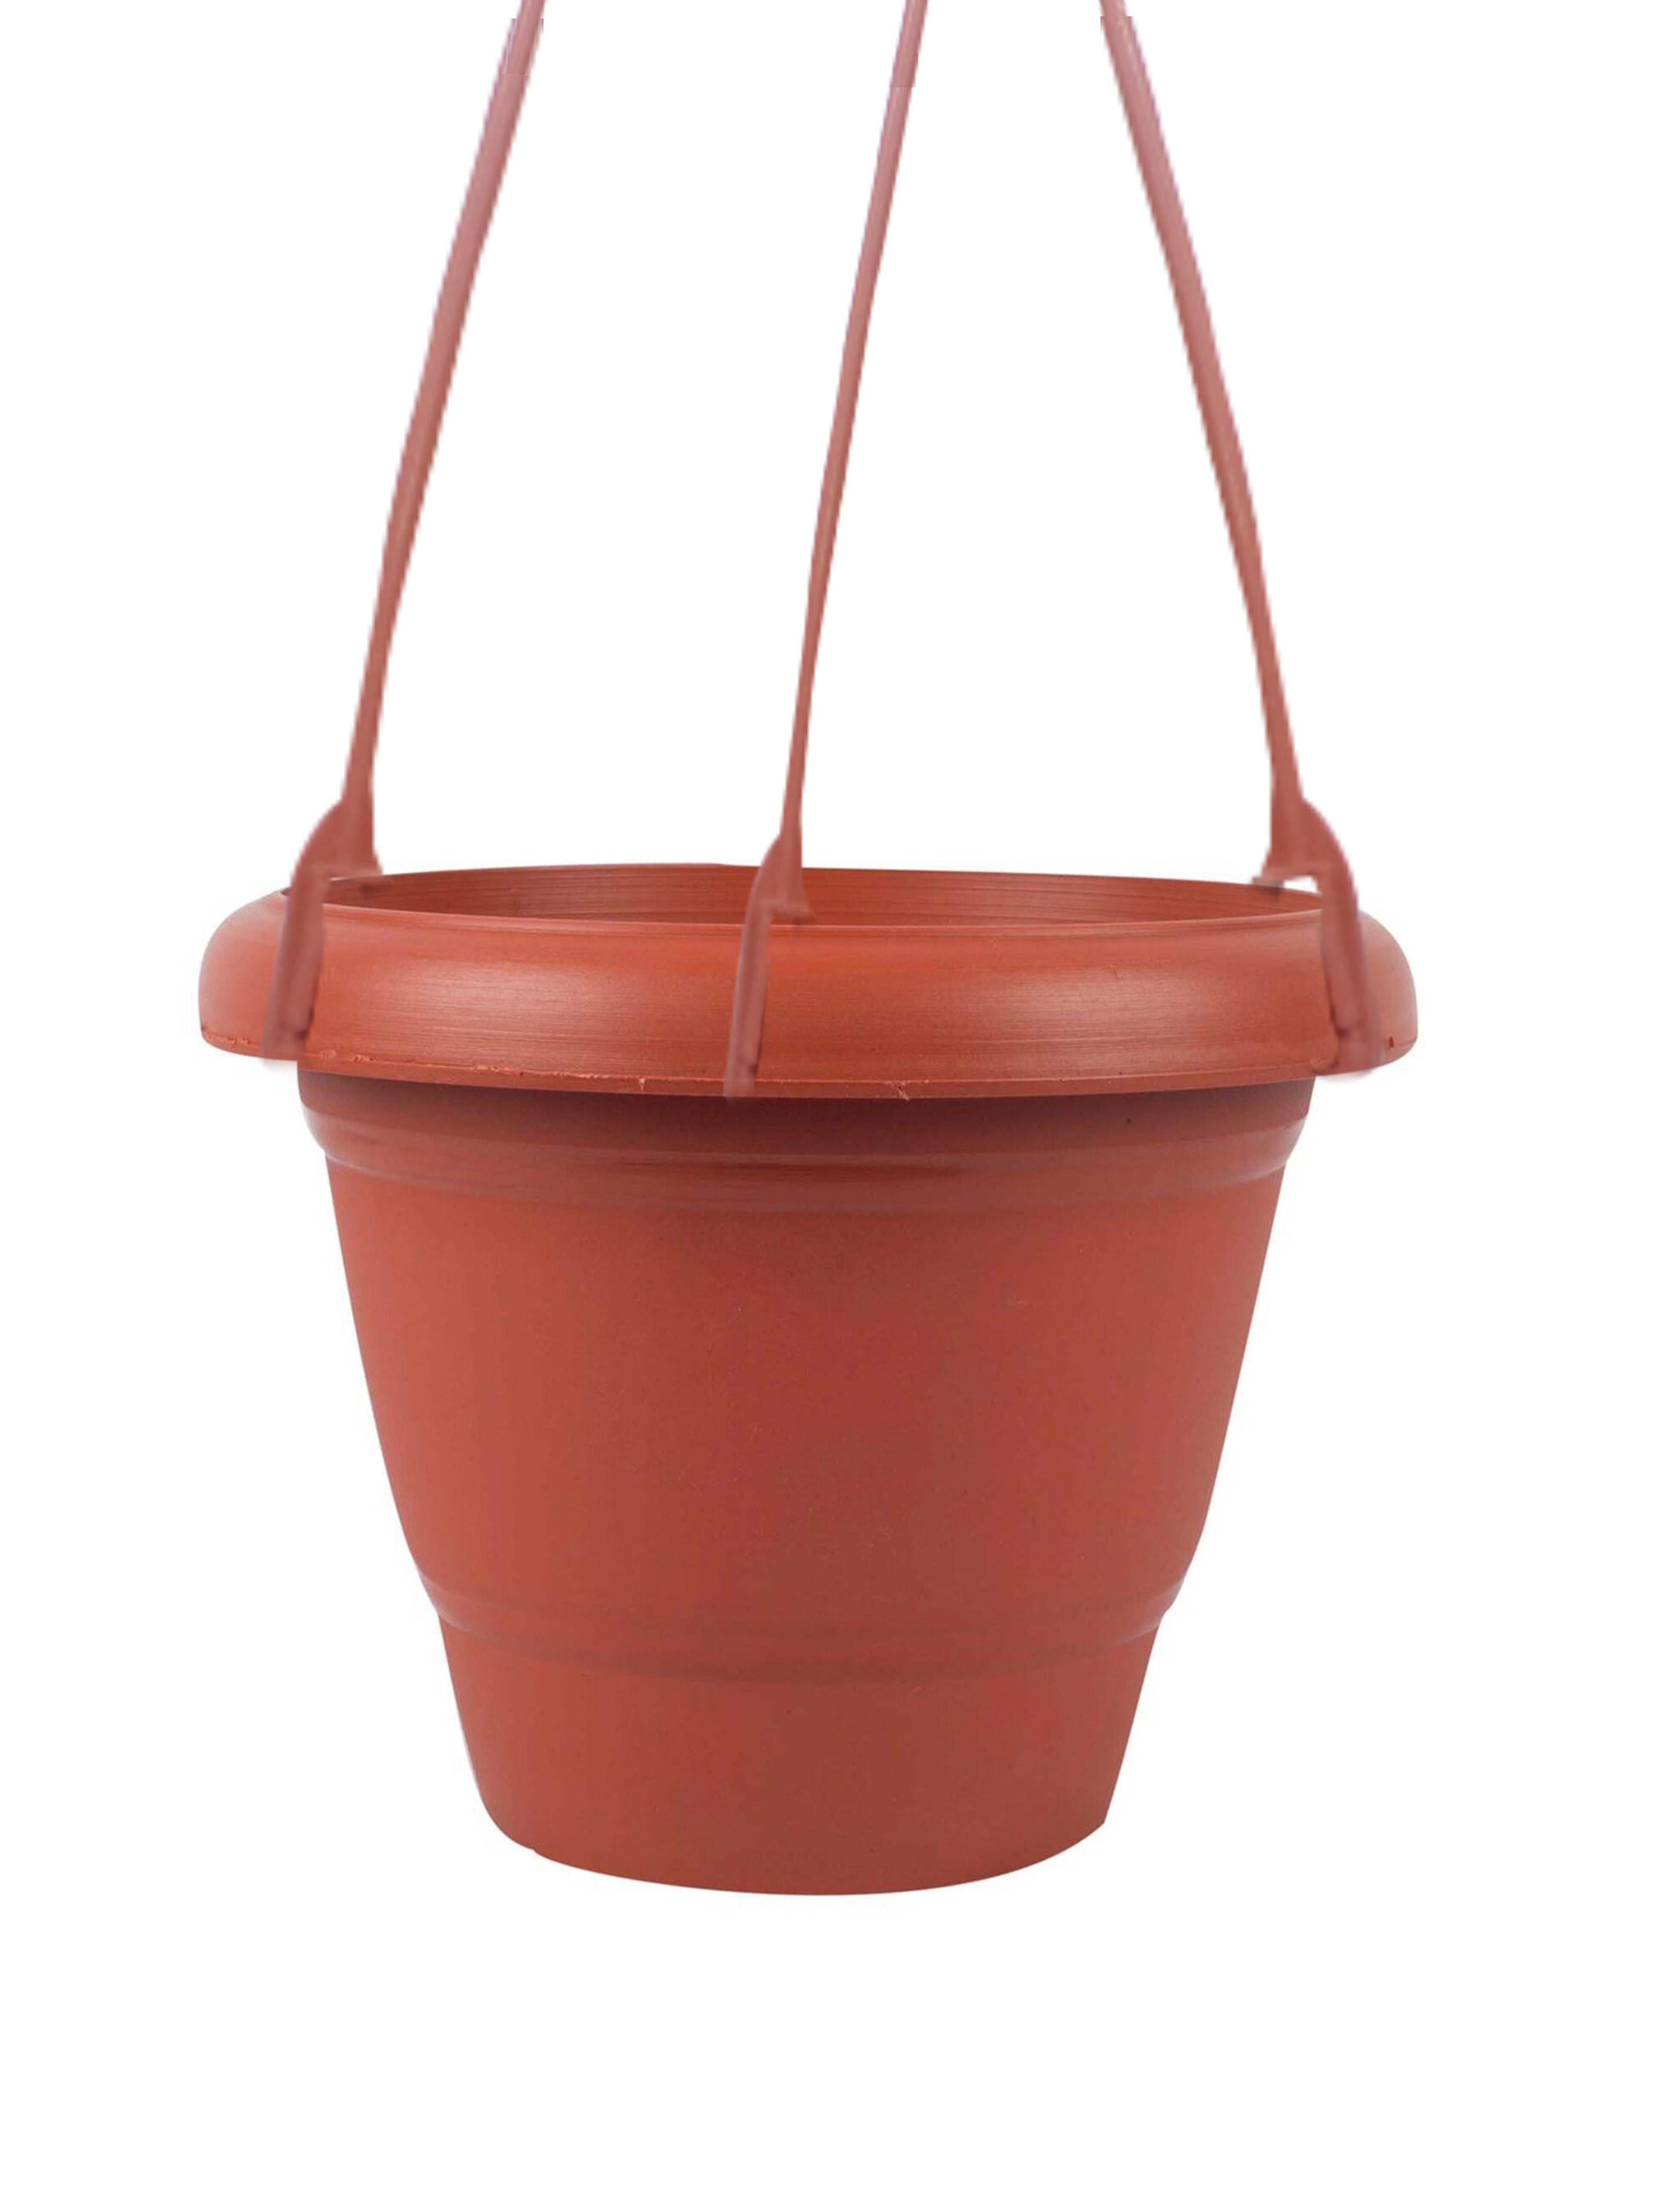 0840 Hanging Flower Pot with Rope - SkyShopy